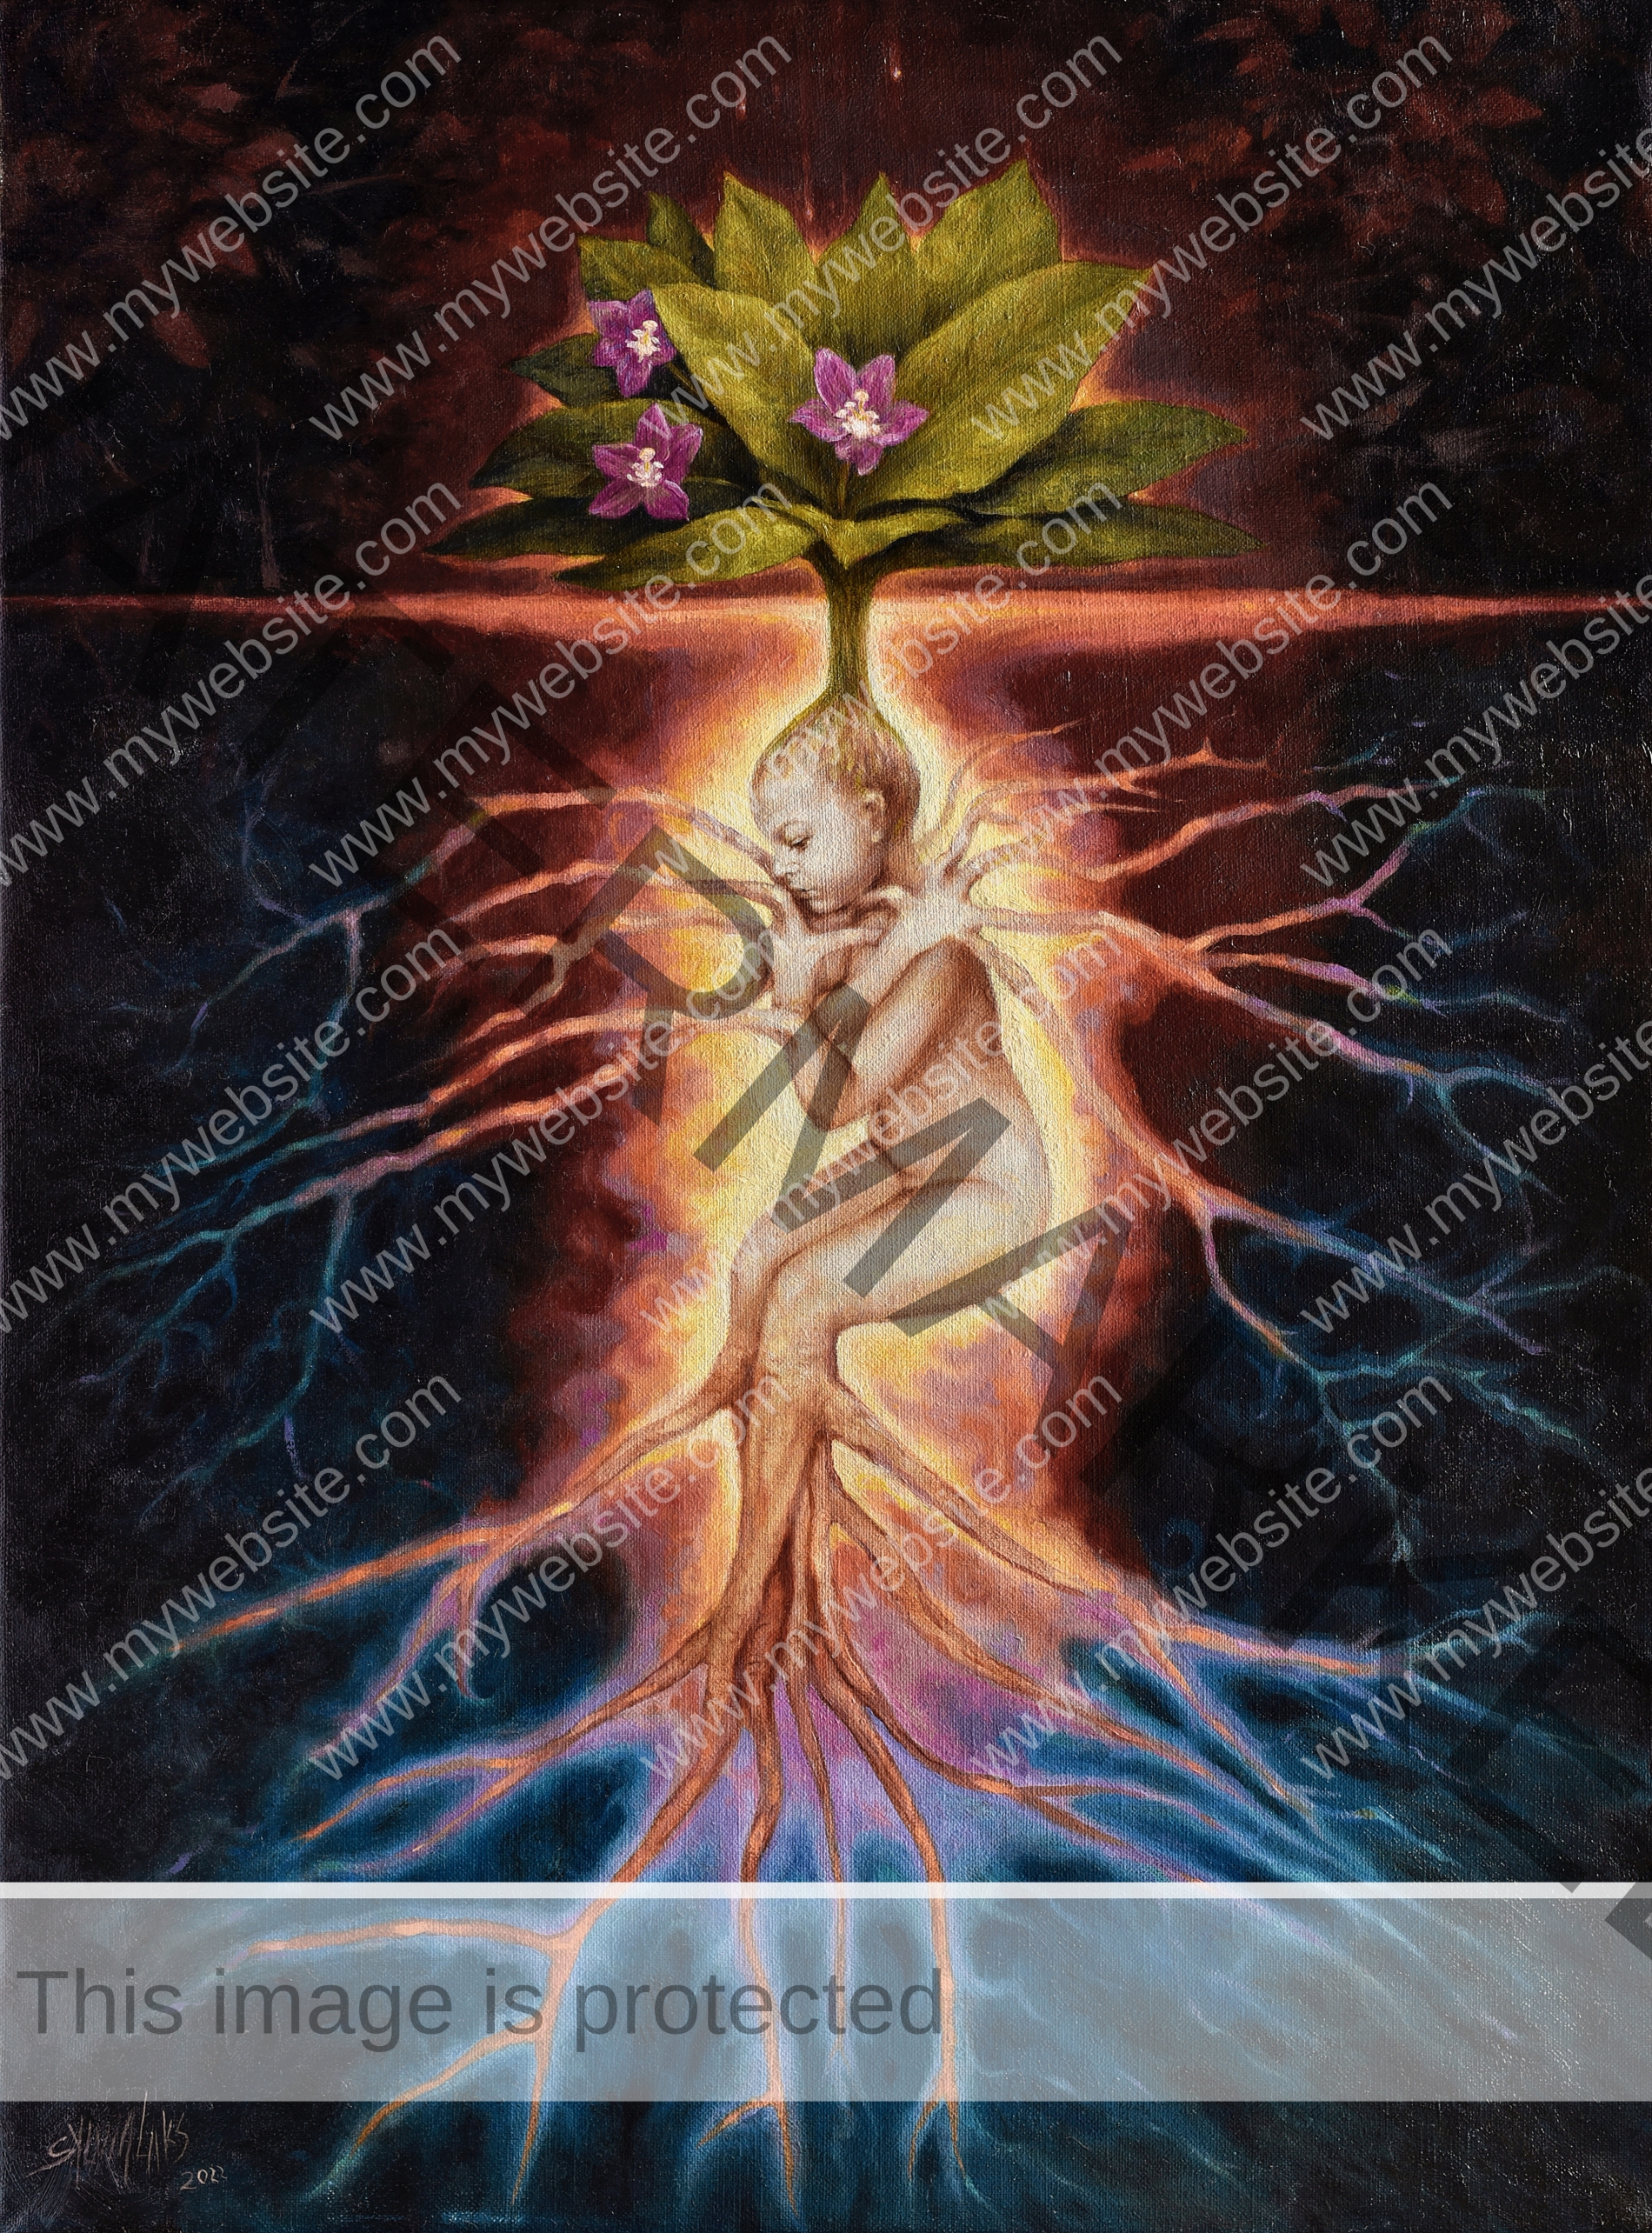 A mandrake painting by Slyvia Laks, depicting a cross-section of the earth and the extending roots beneath the ground. The painting is powerfully feminine as it nods to Mother Earth.